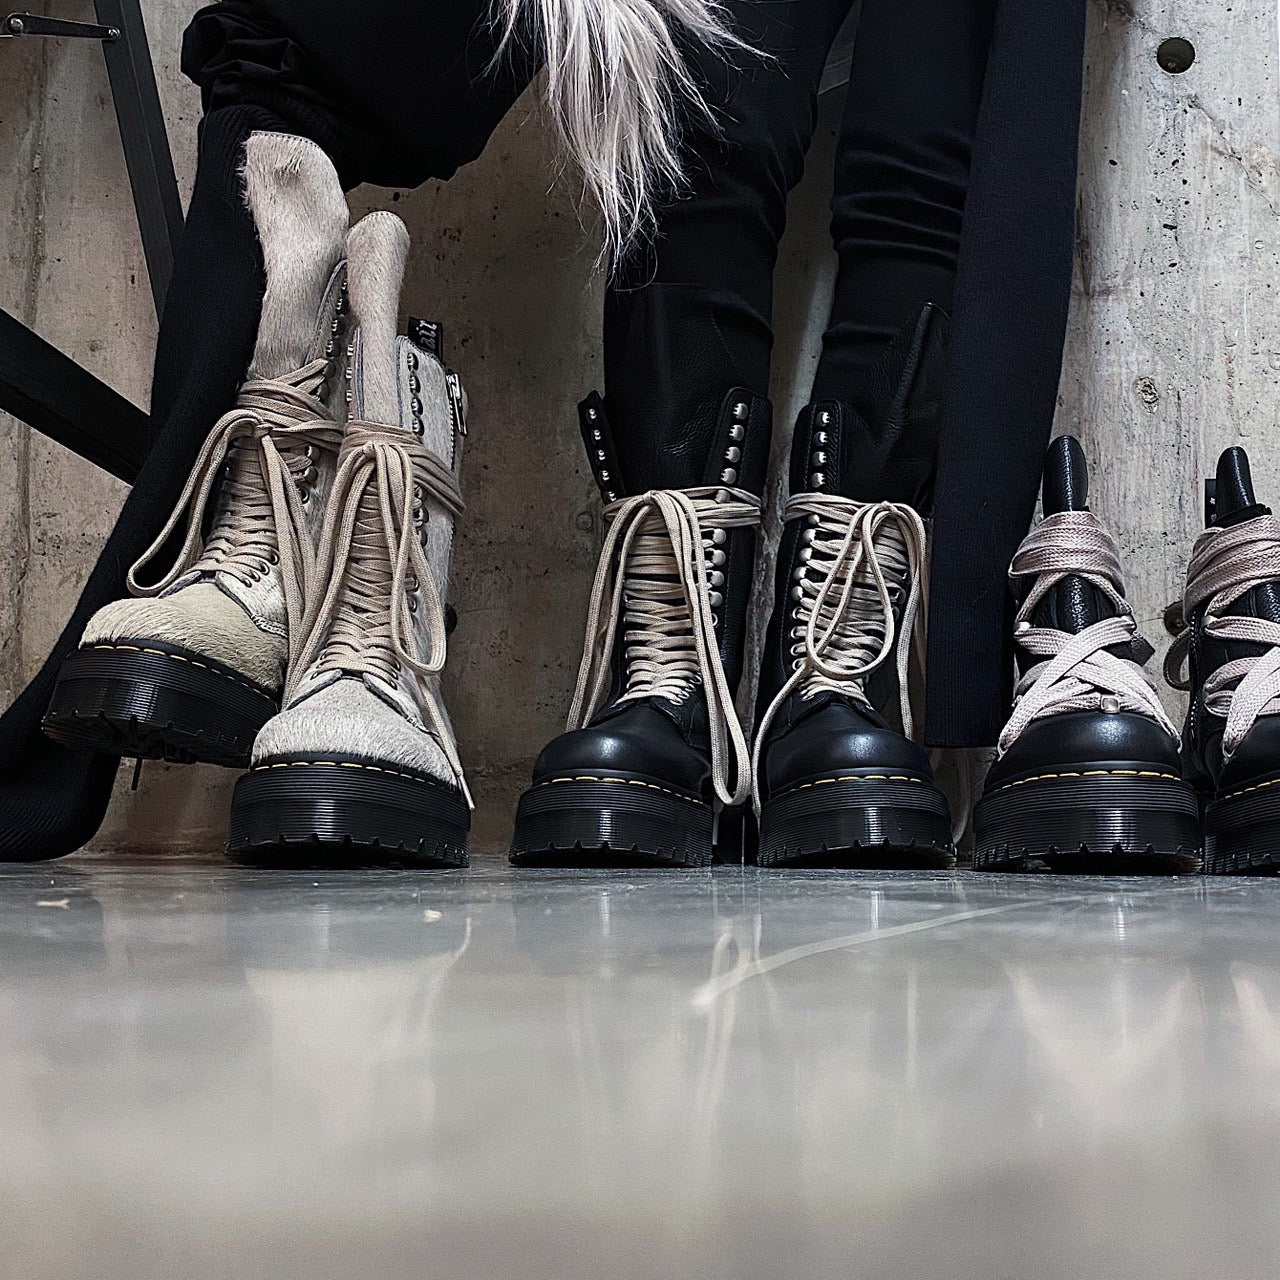 【Rick Owens x Dr. Martens】<br> The second collaboration boots will be on sale from 00:00 on Saturday, December 3rd! !